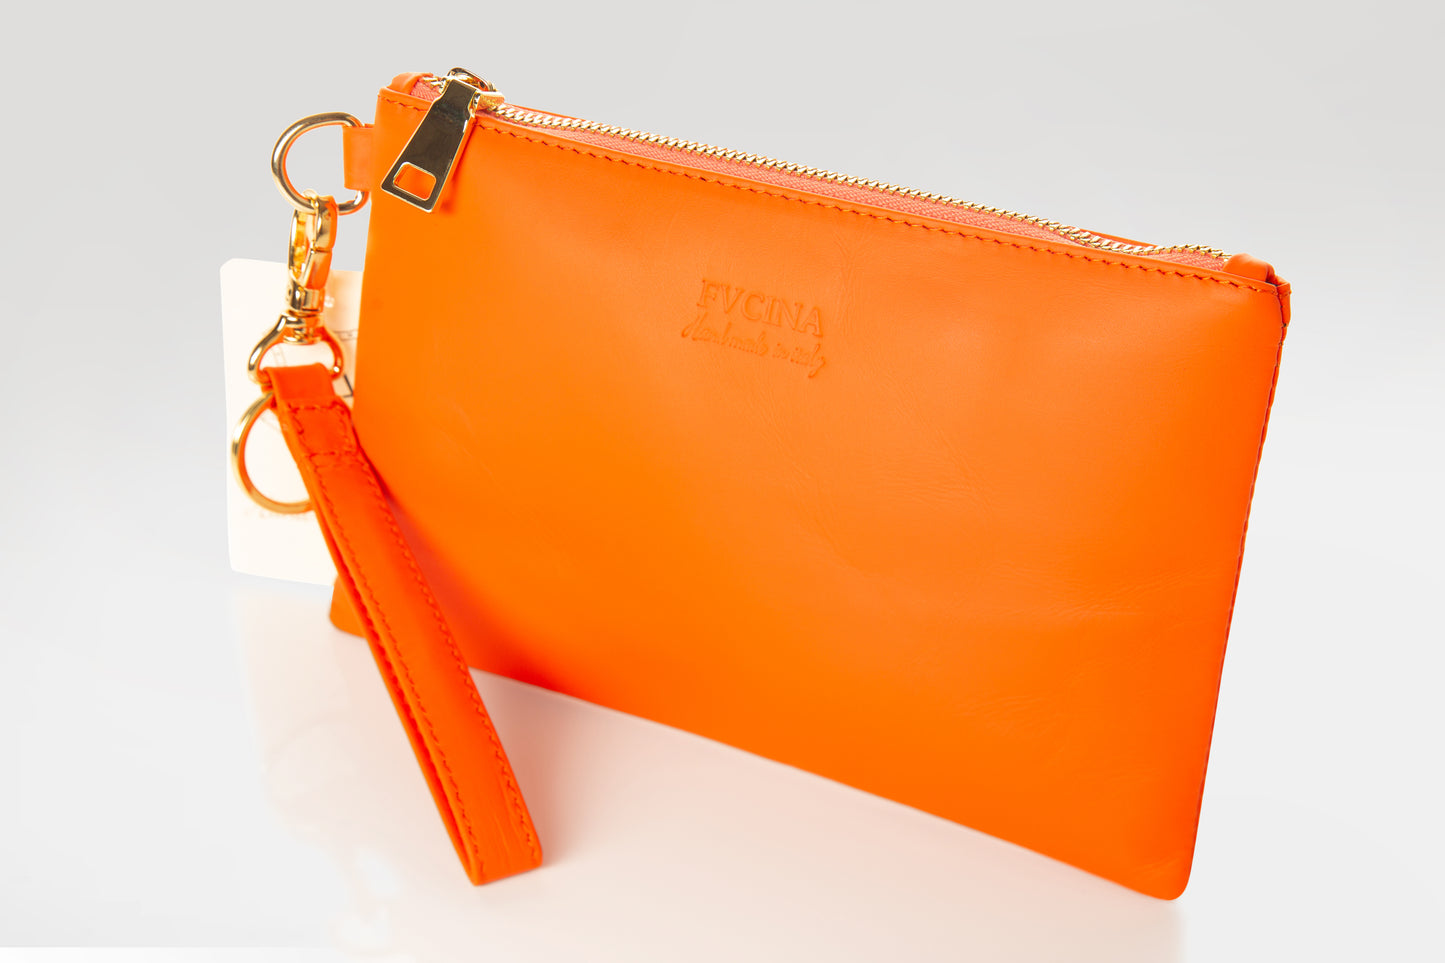 Christmas gifts, orange leather clutch, Italian leather clutch, handmade leather clutch, premium leather clutch, high-quality leather clutch, handbags, women clutches 